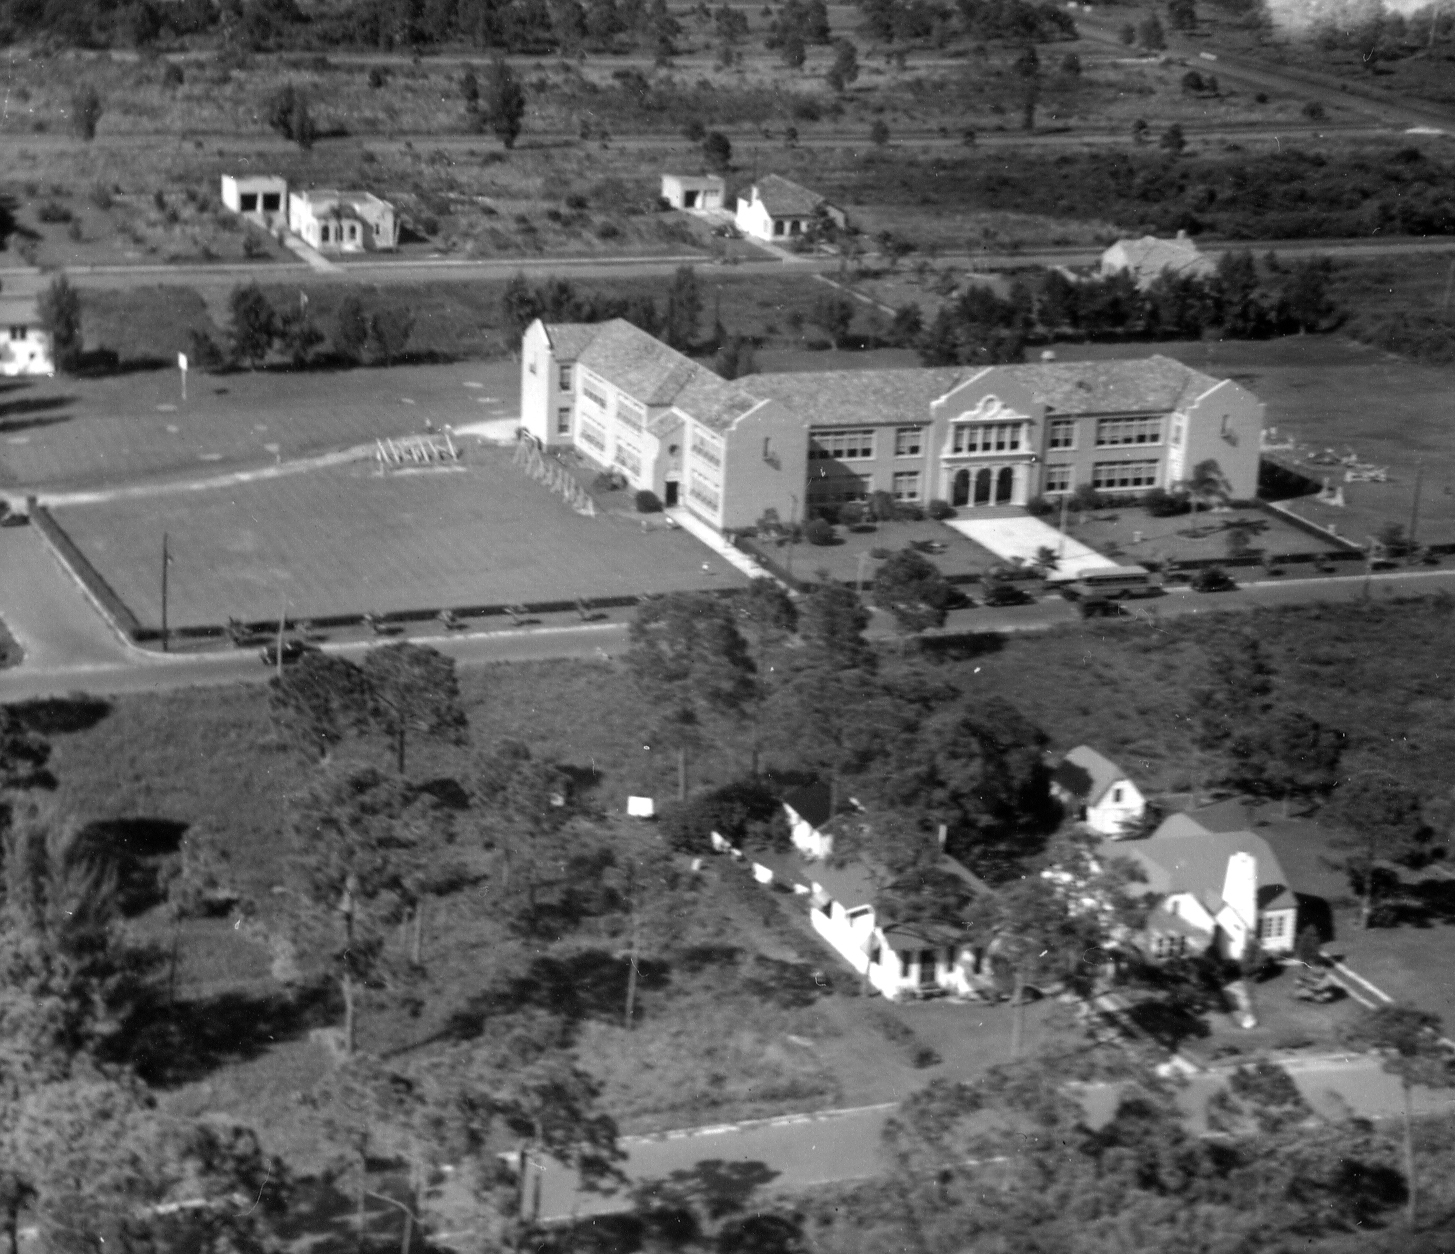 This 1937 image shows Southside Elementary School surrounded by farmland and a few houses. Photo courtesy Sarasota County Libraries & Historical Resources.